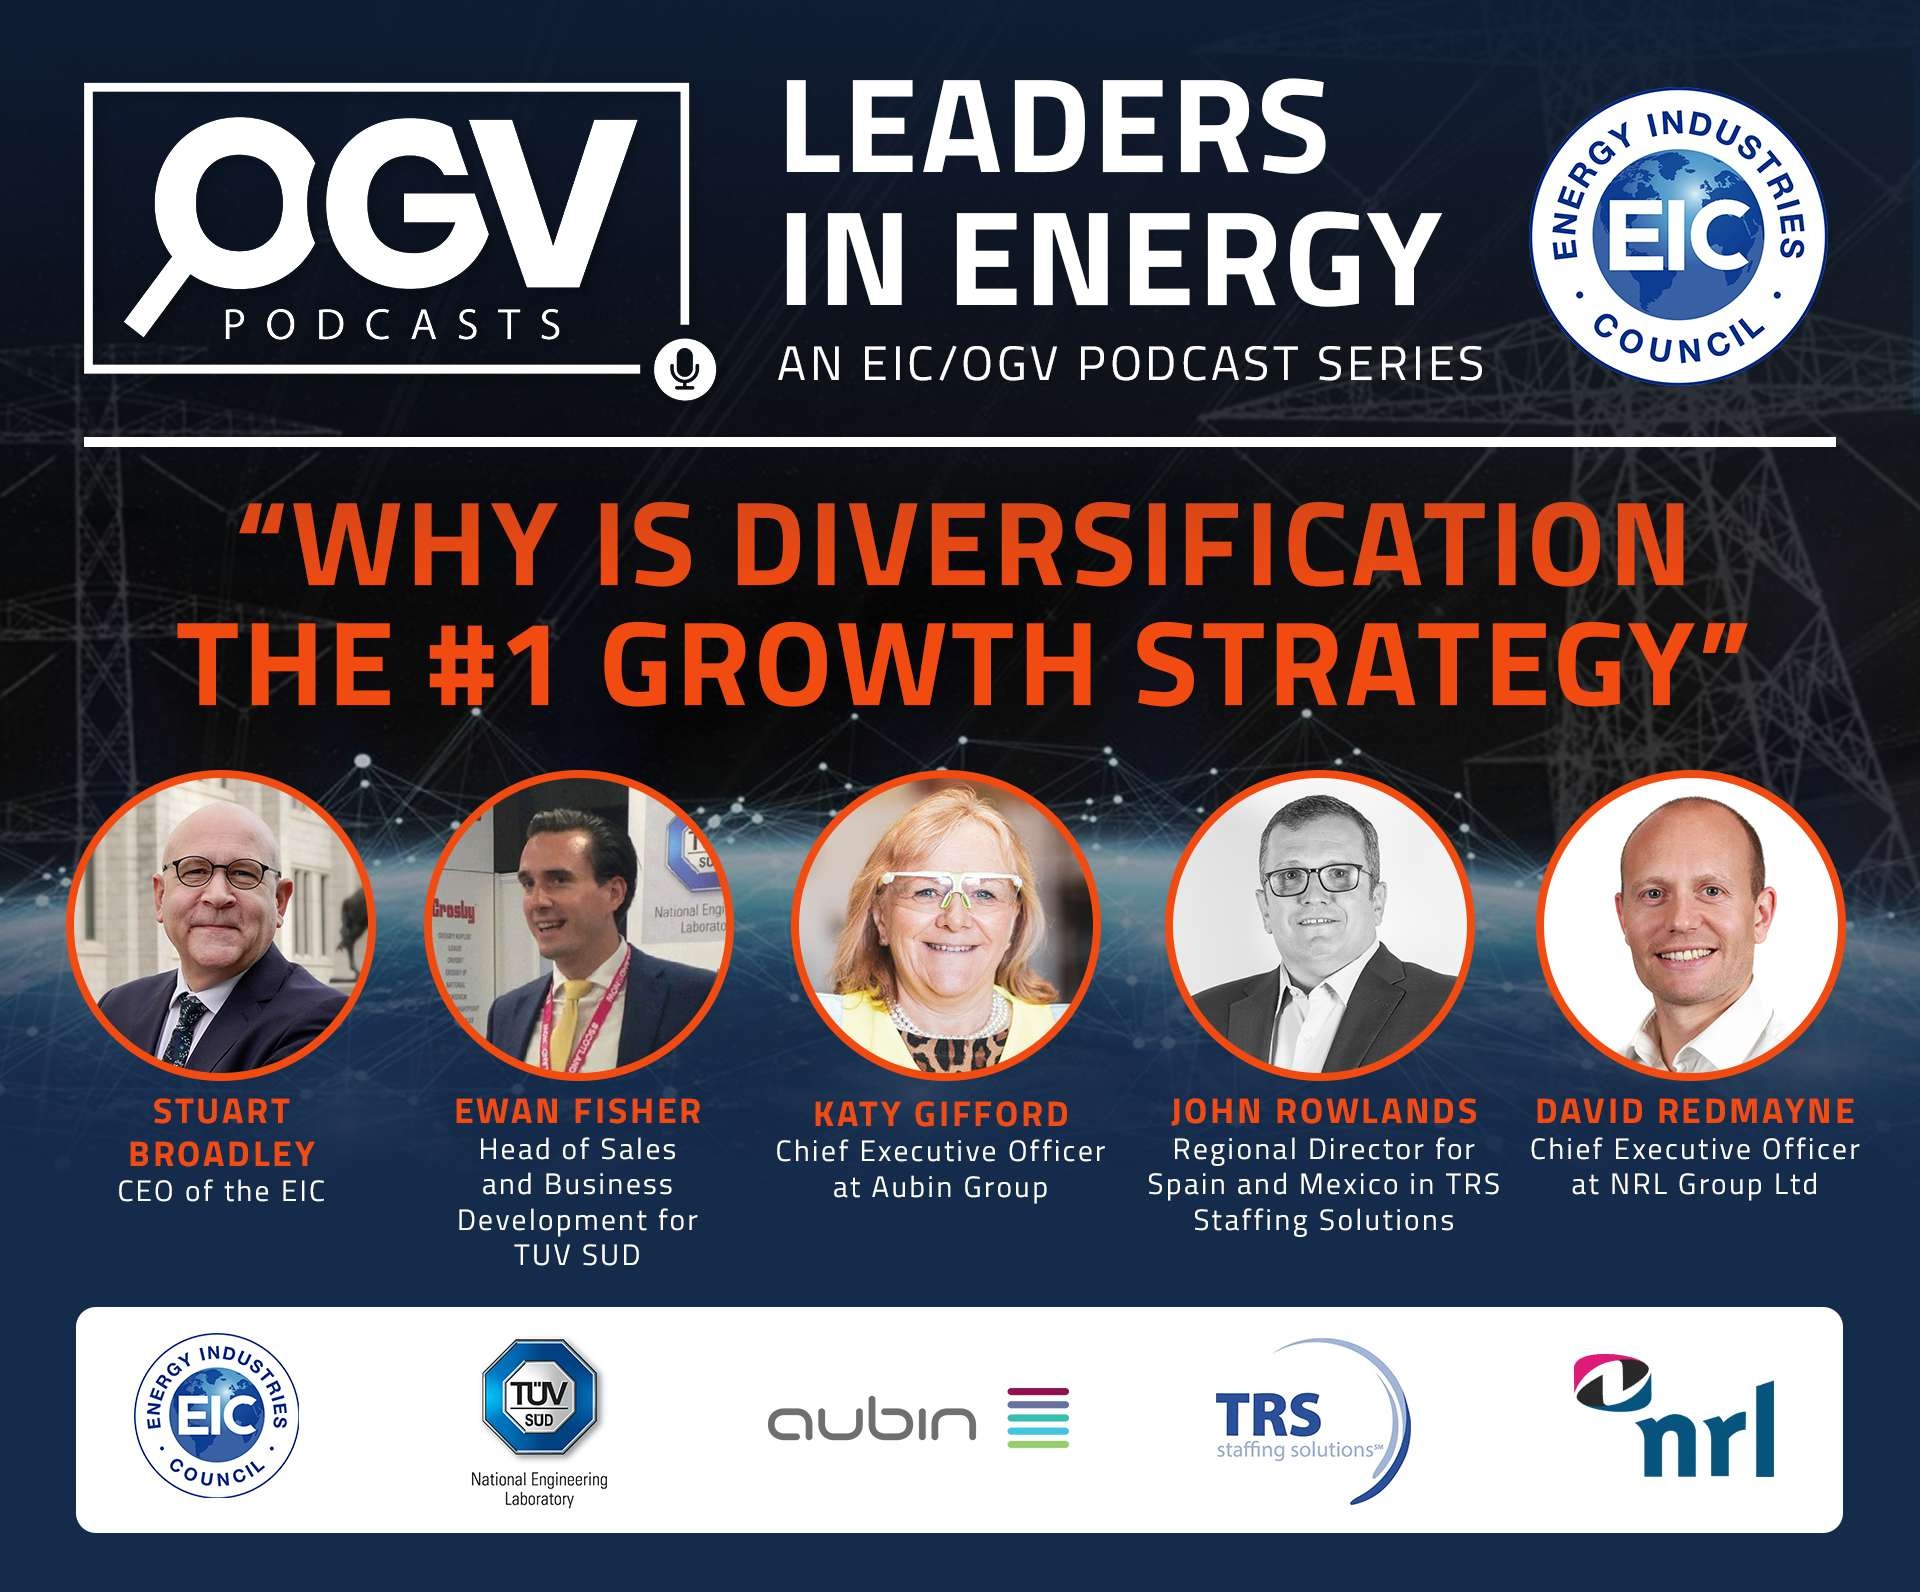 "Why is diversification the #1 growth strategy" Leaders in Energy